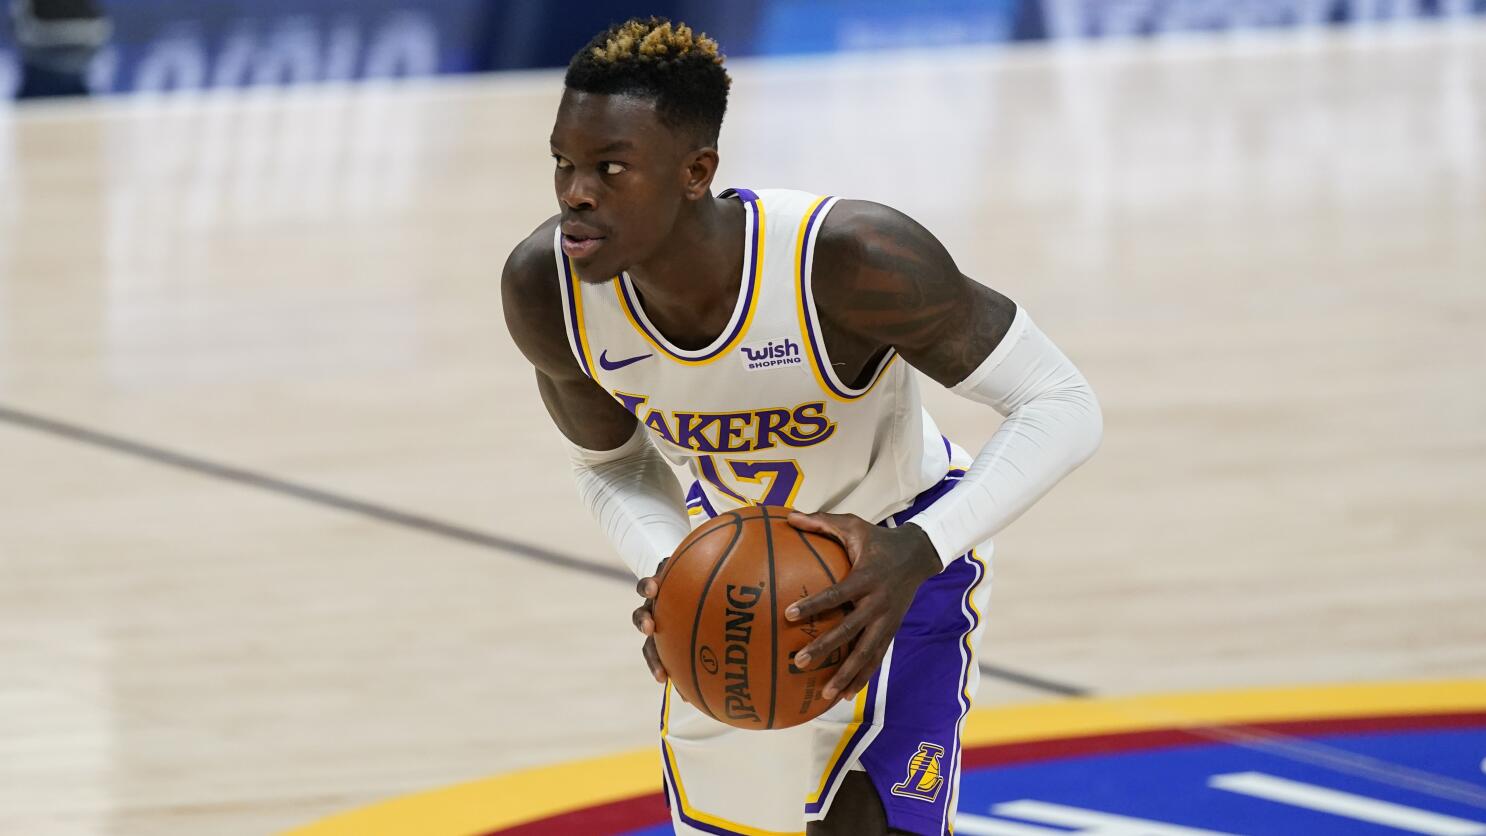 Dennis Schroder might have made the worst bet on himself in sports history, This is the Loop